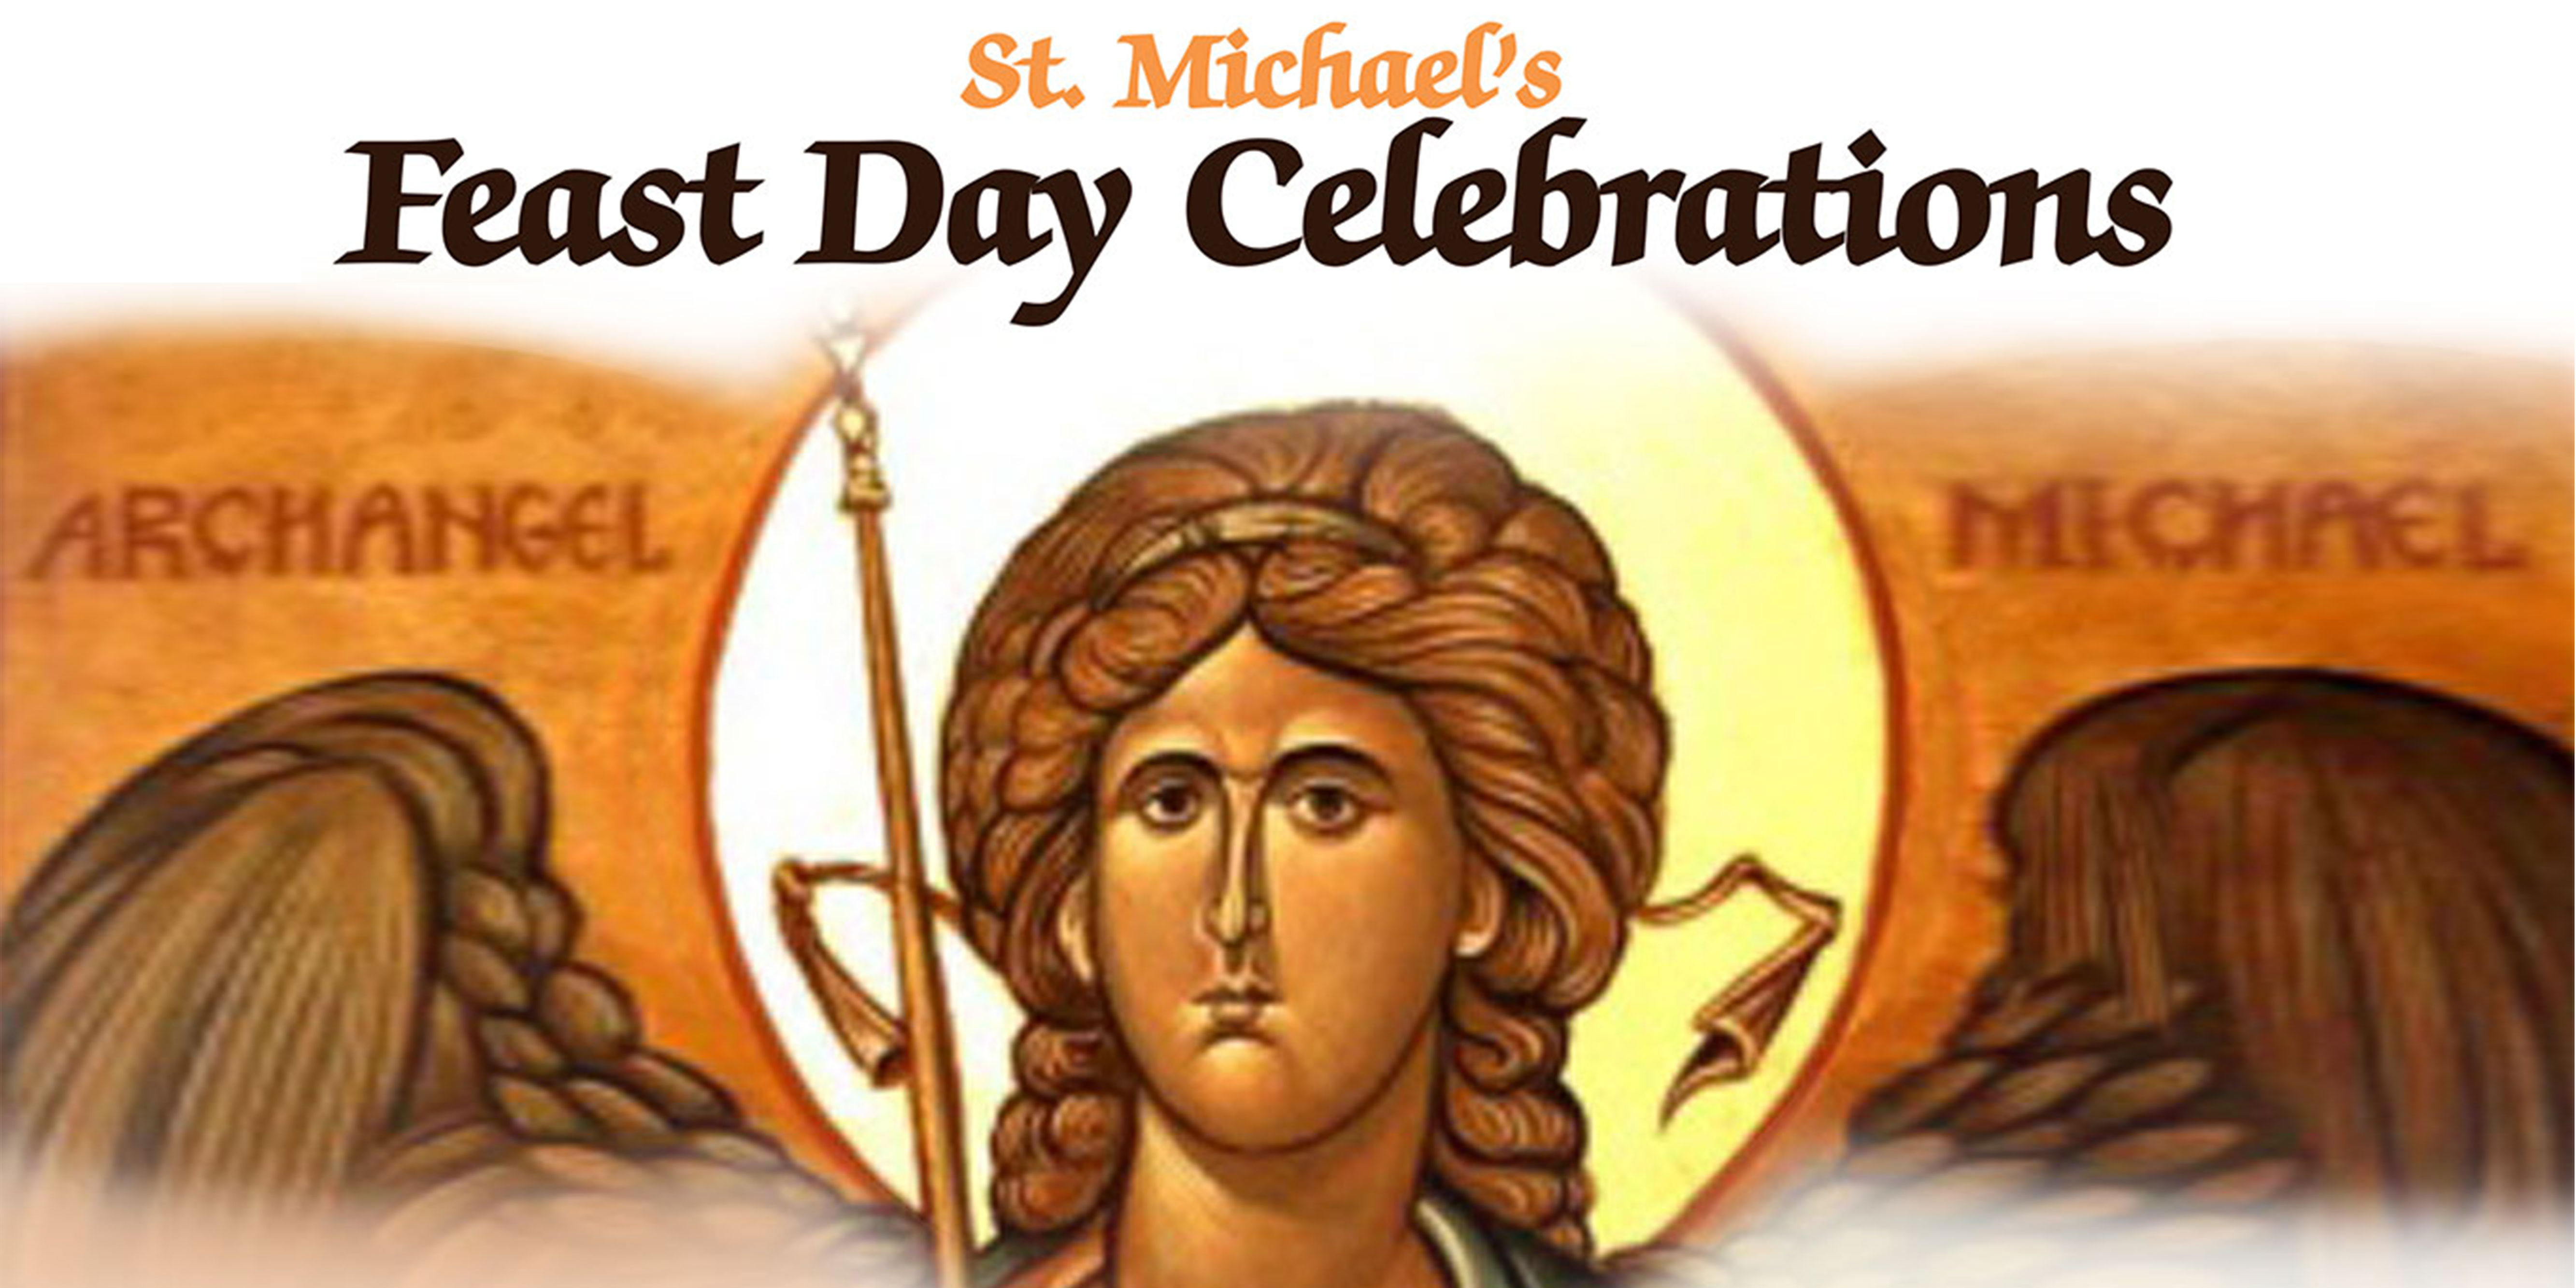 St Michael Feast Day Cheap Retailers, Save 45 jlcatj.gob.mx